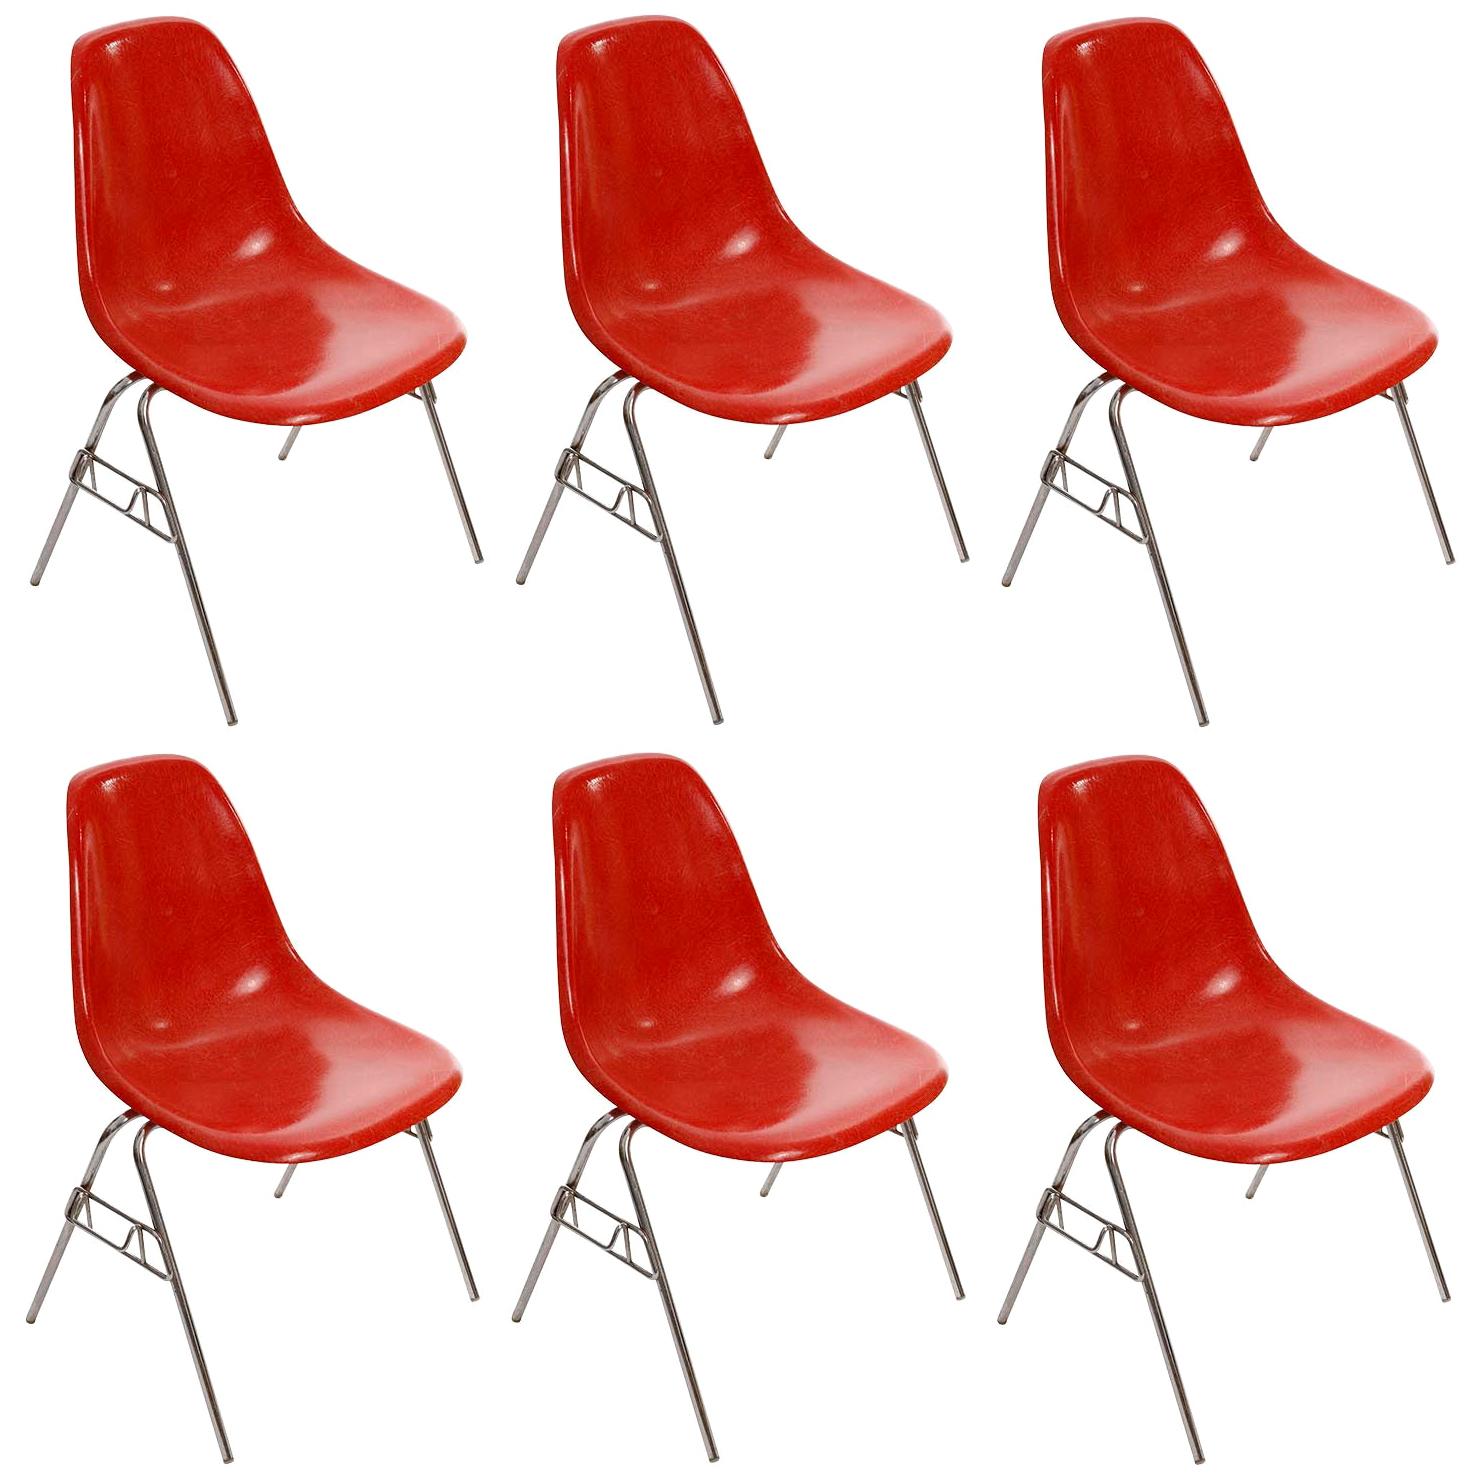 Six Stacking Chairs, Charles & Ray Eames, Herman Miller, Red Fiberglass, 1974.